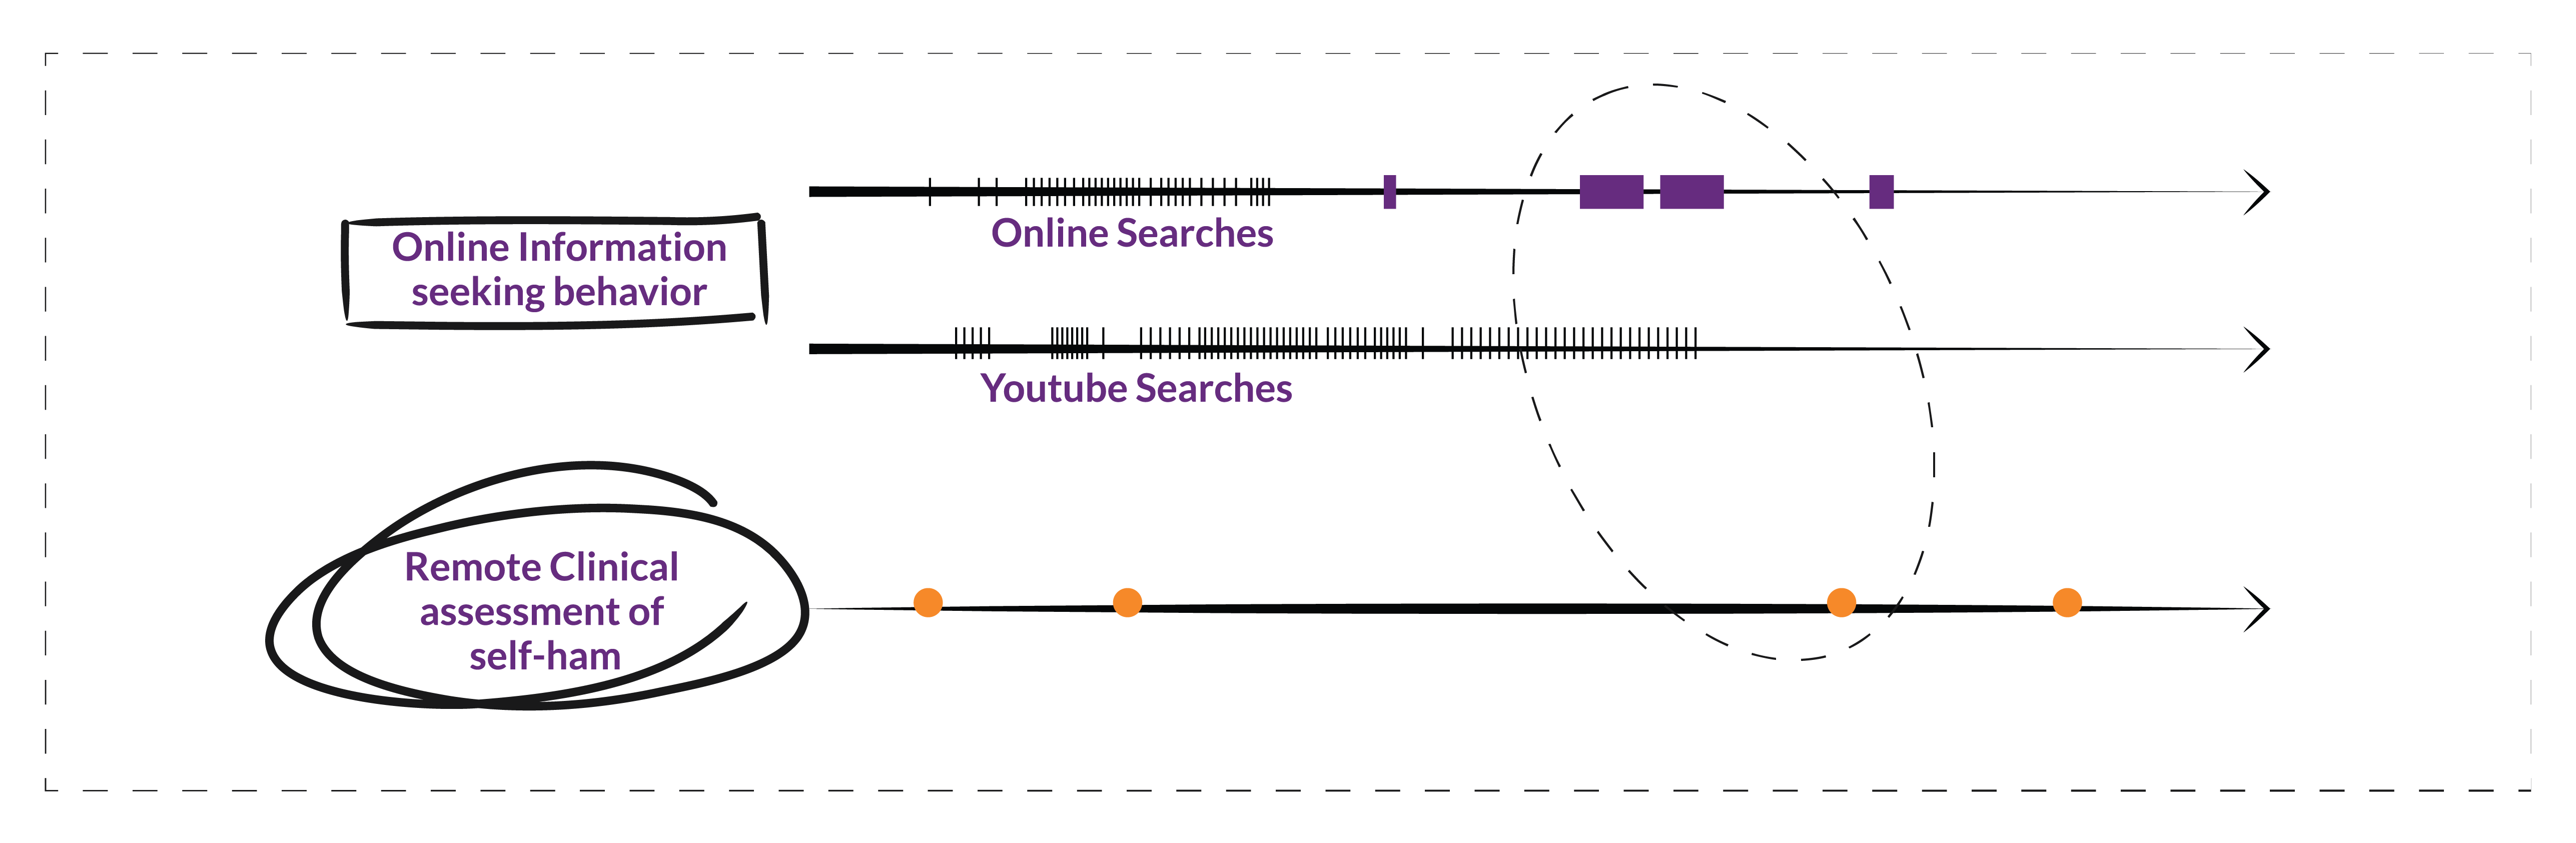 Diagram describing frequency of online searching